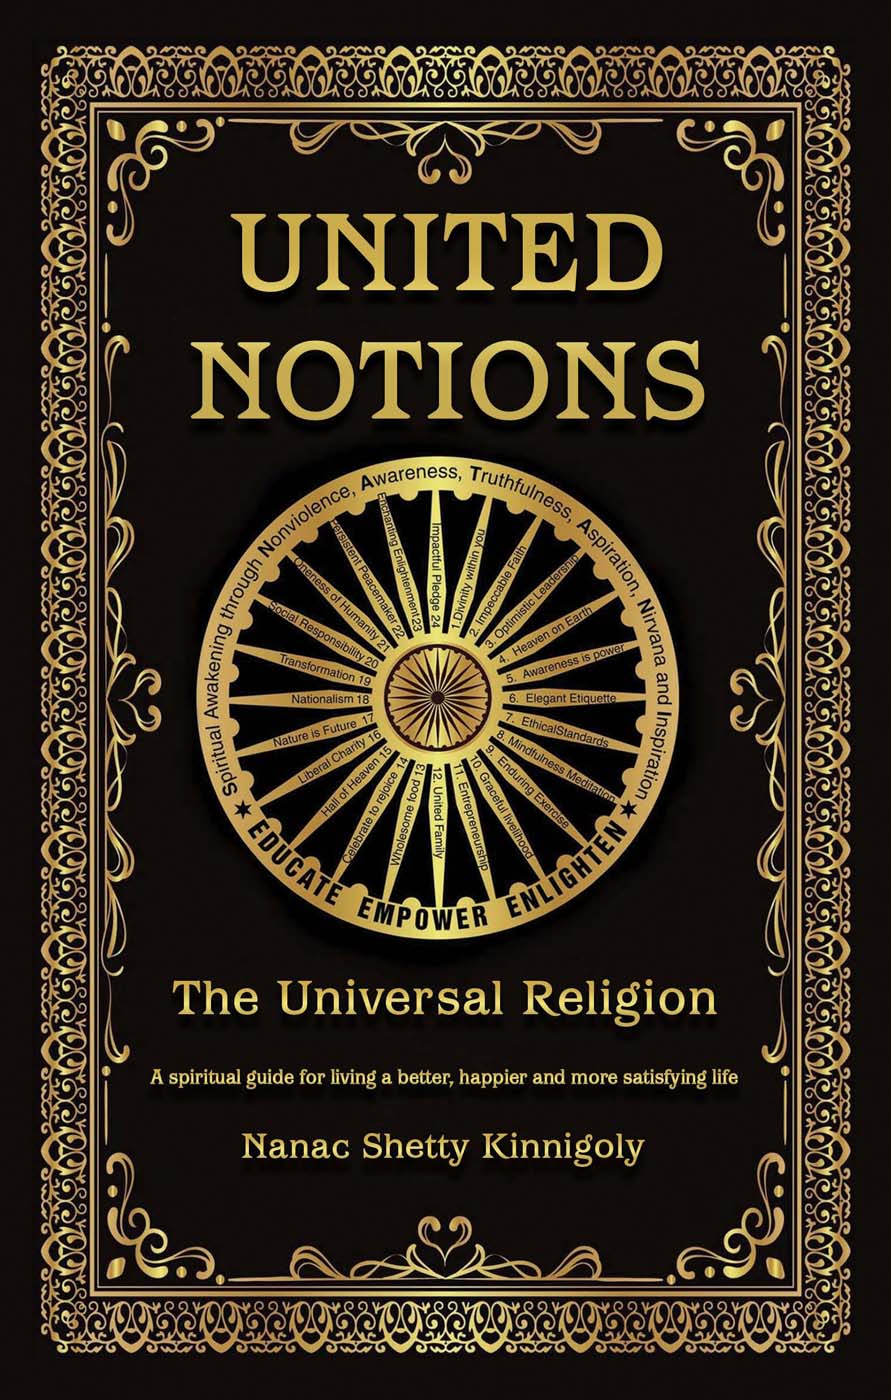 United Notions: The Universal Religion